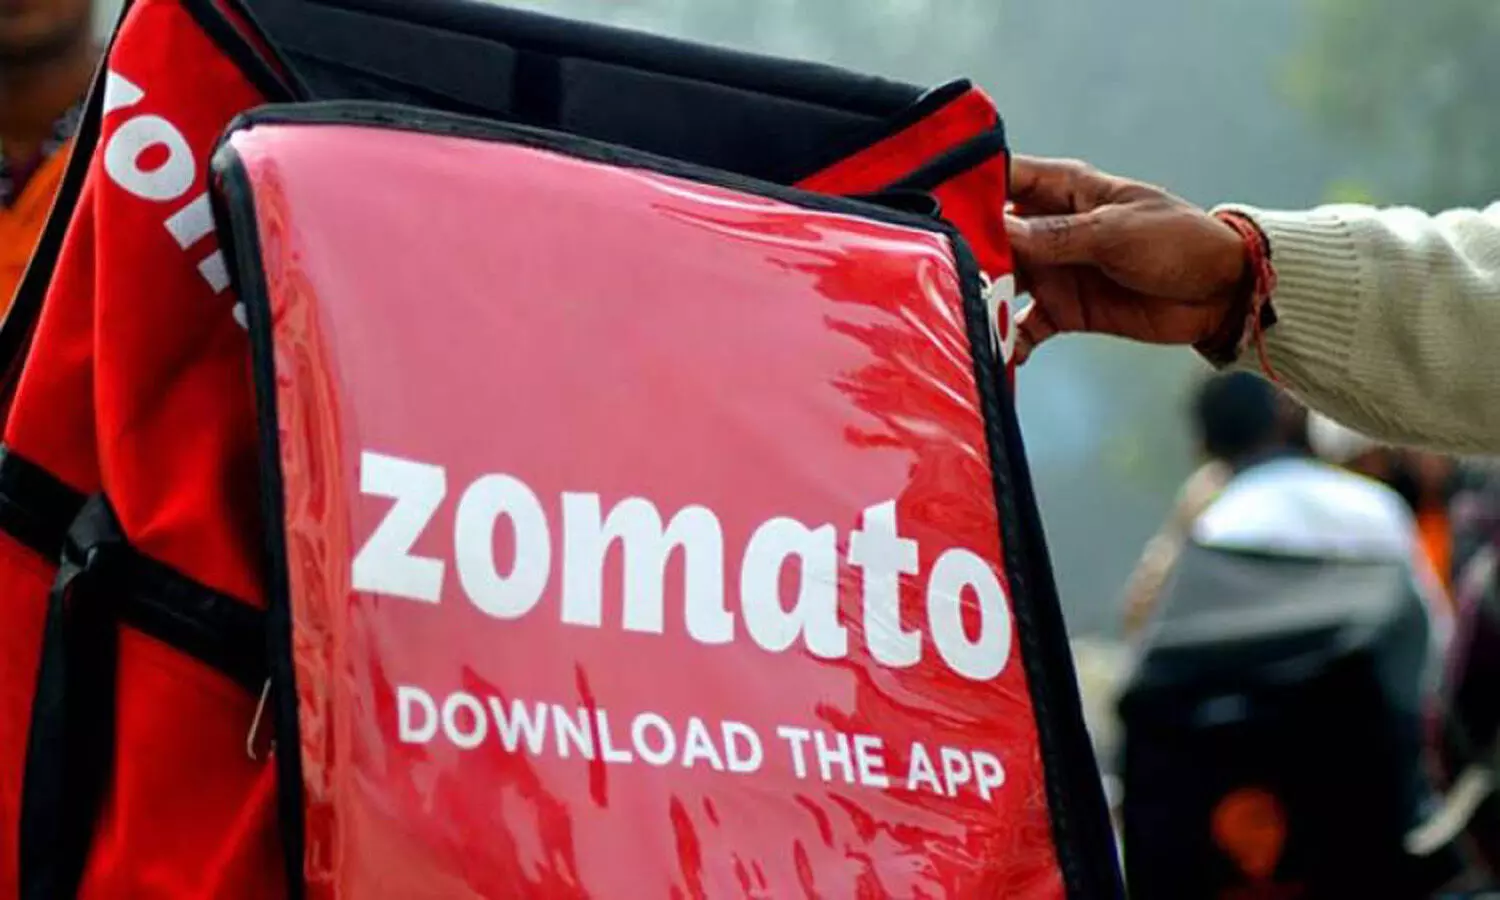 Zomato all set to scrap its grocery delivery, nutraceutical business from September 17